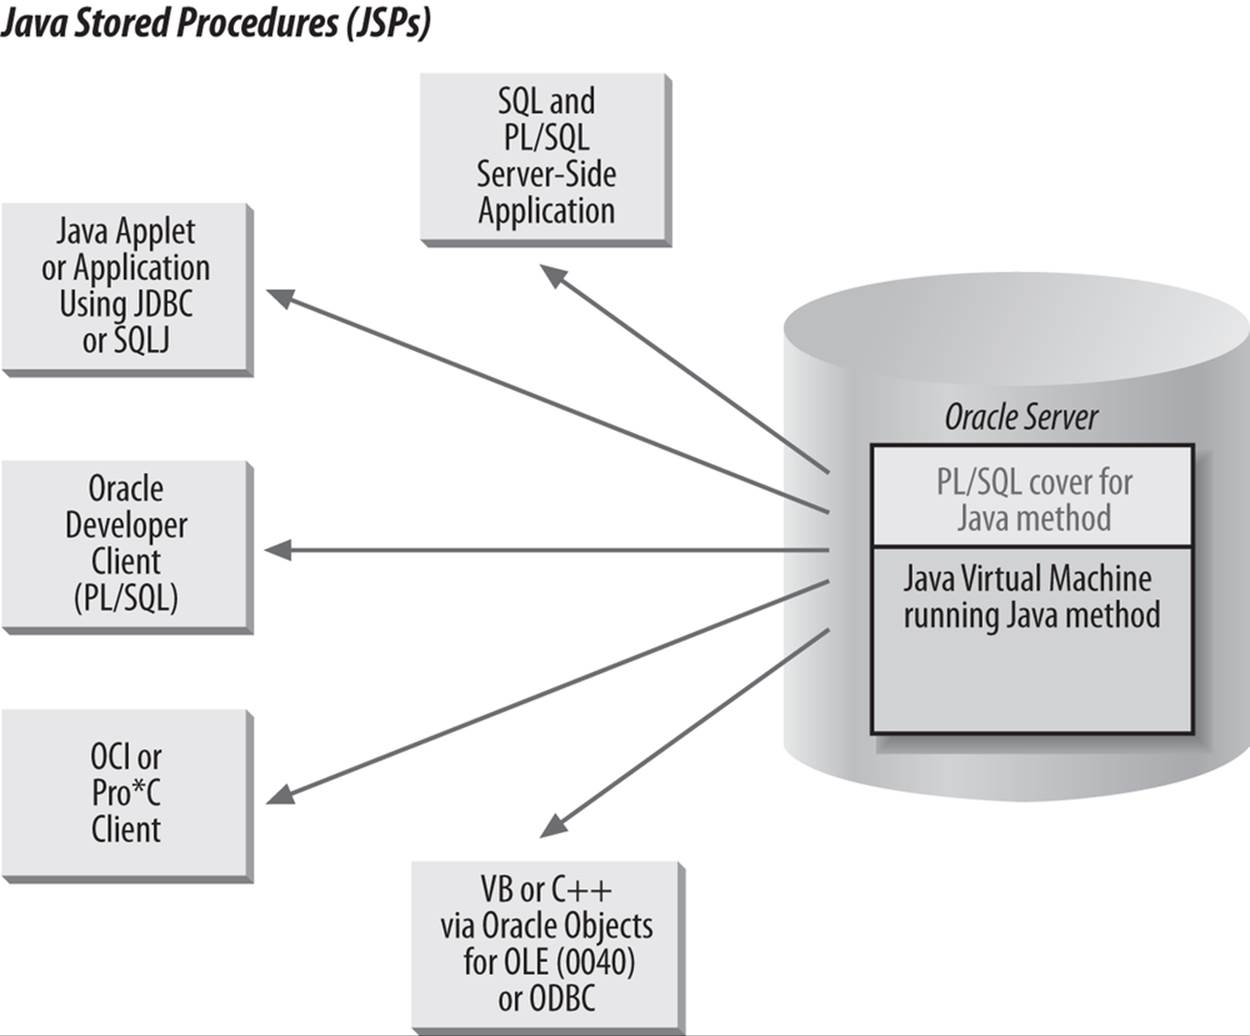 Accessing JSPs from within the Oracle database